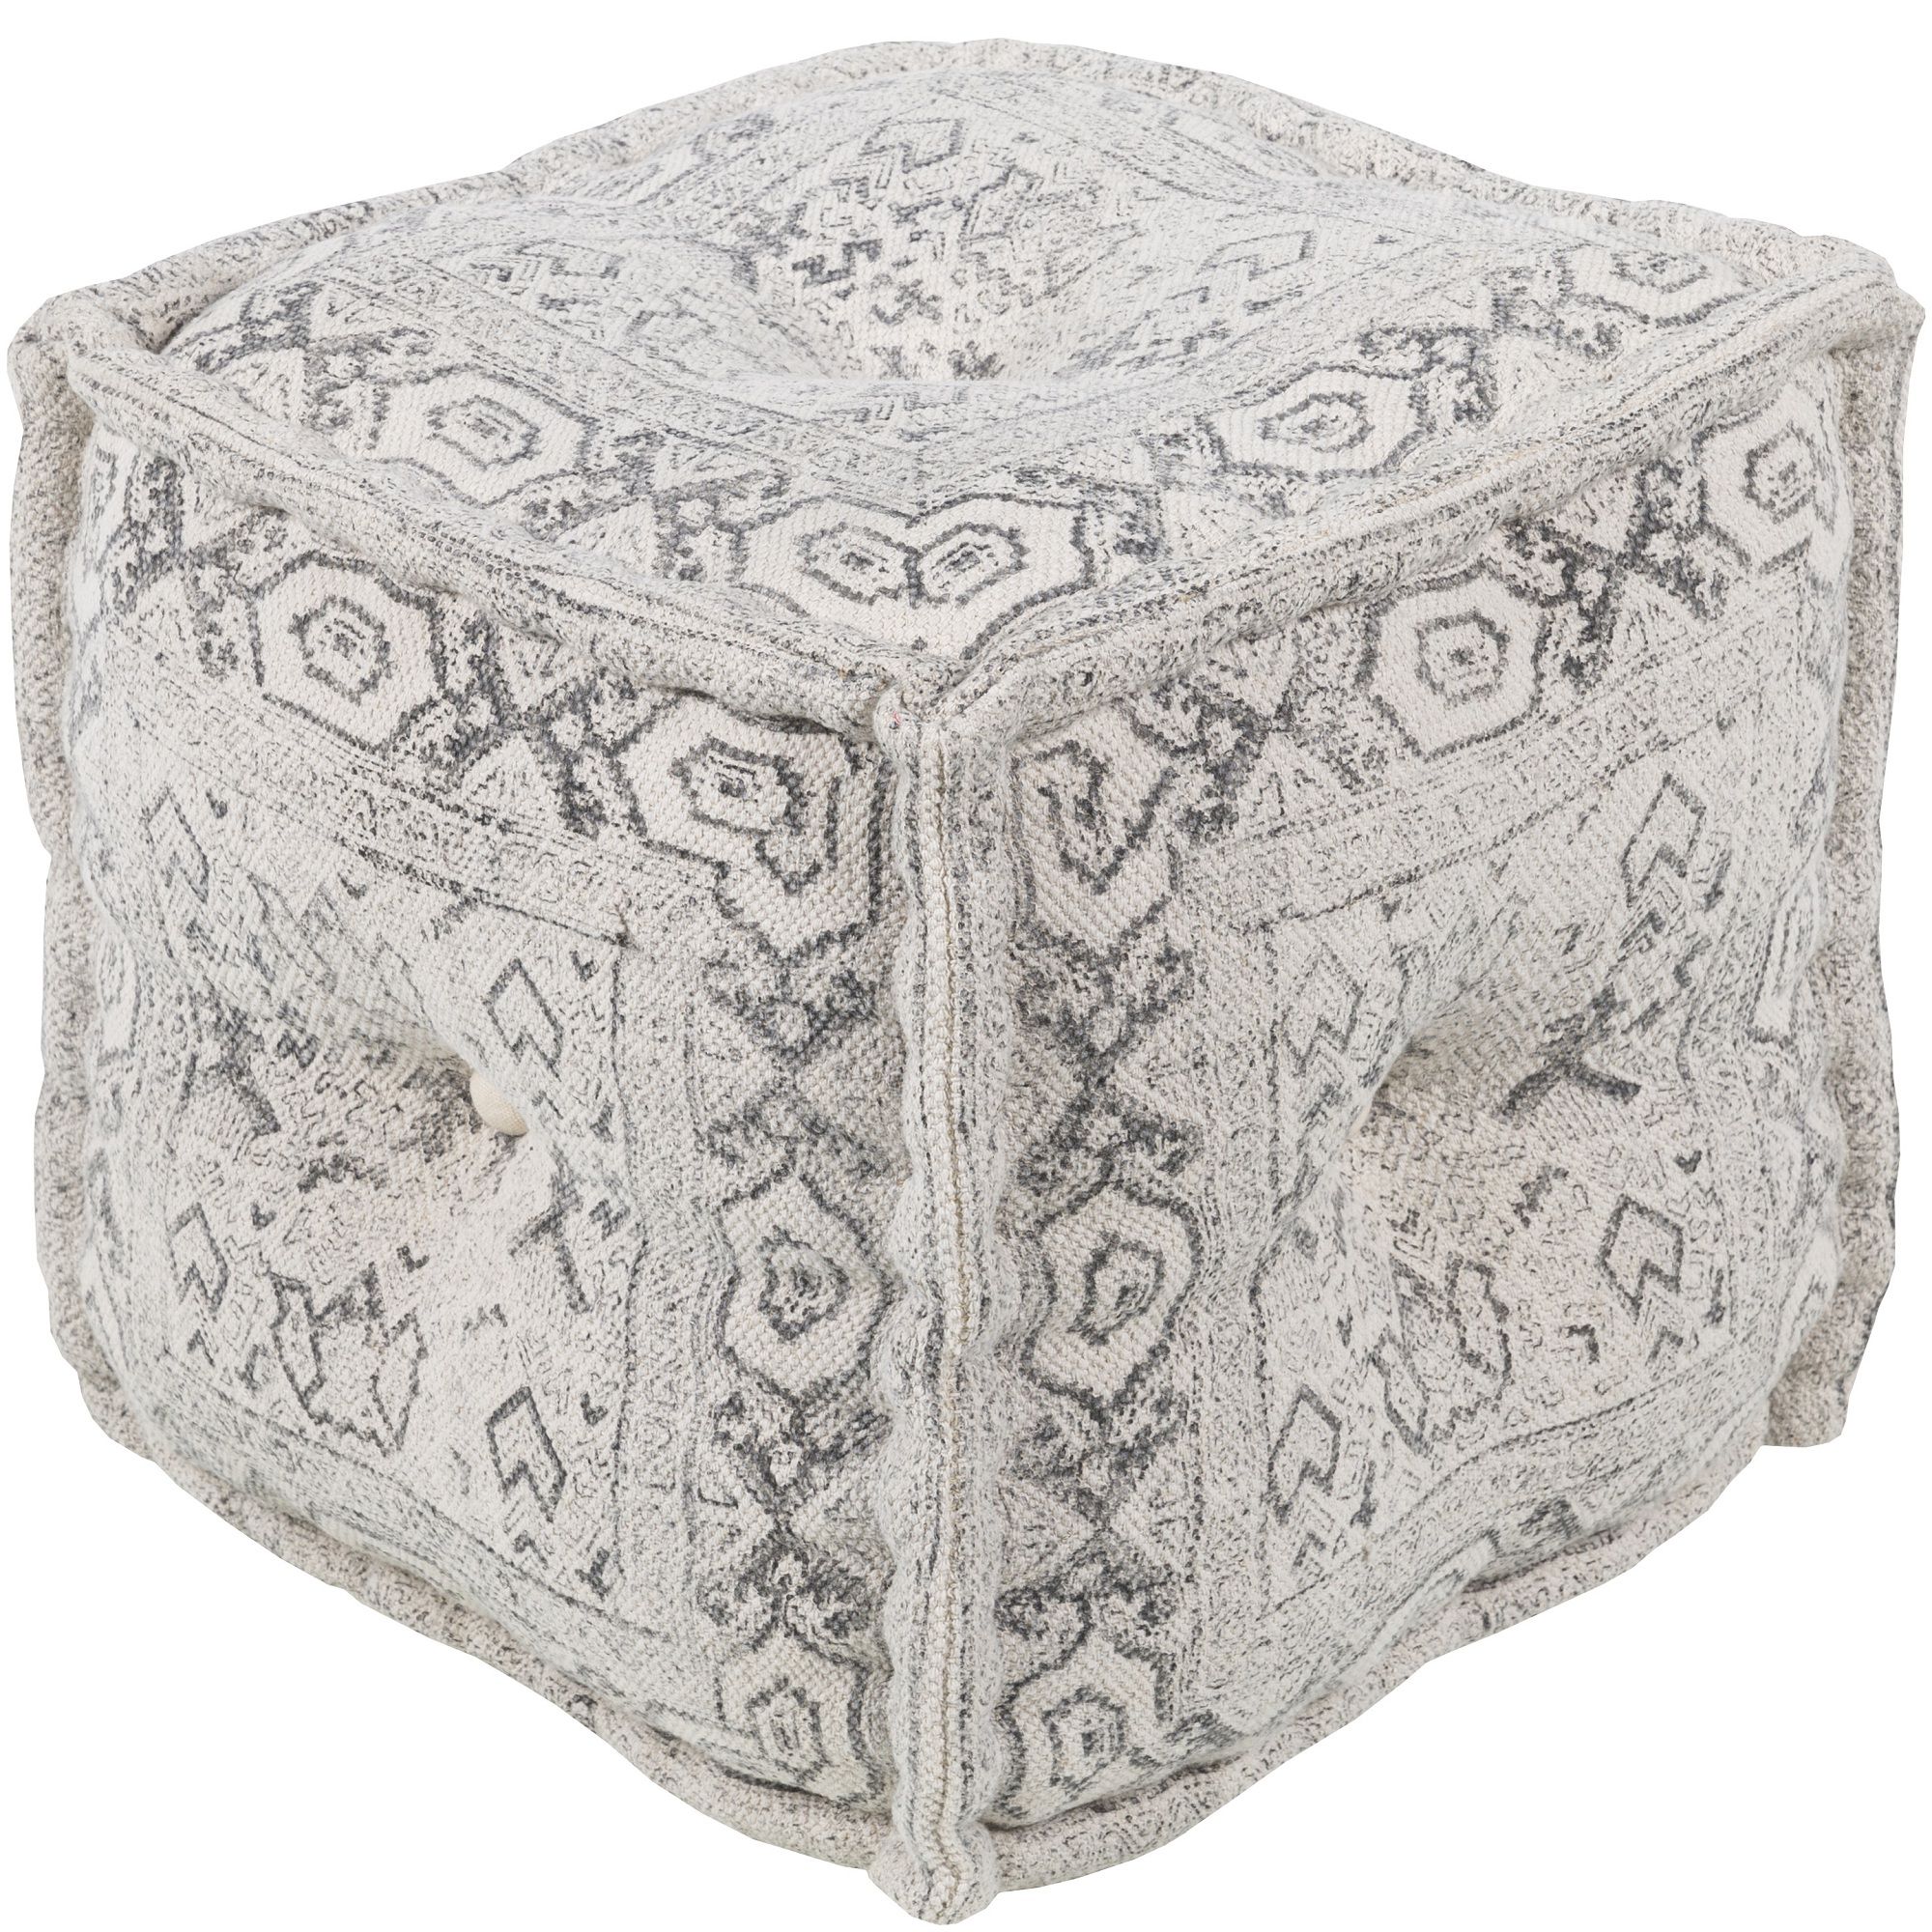 16" White And Gray Bohemian Style Design Cotton Square Pouf Ottoman Throughout 2019 Black And Natural Cotton Pouf Ottomans (View 7 of 10)